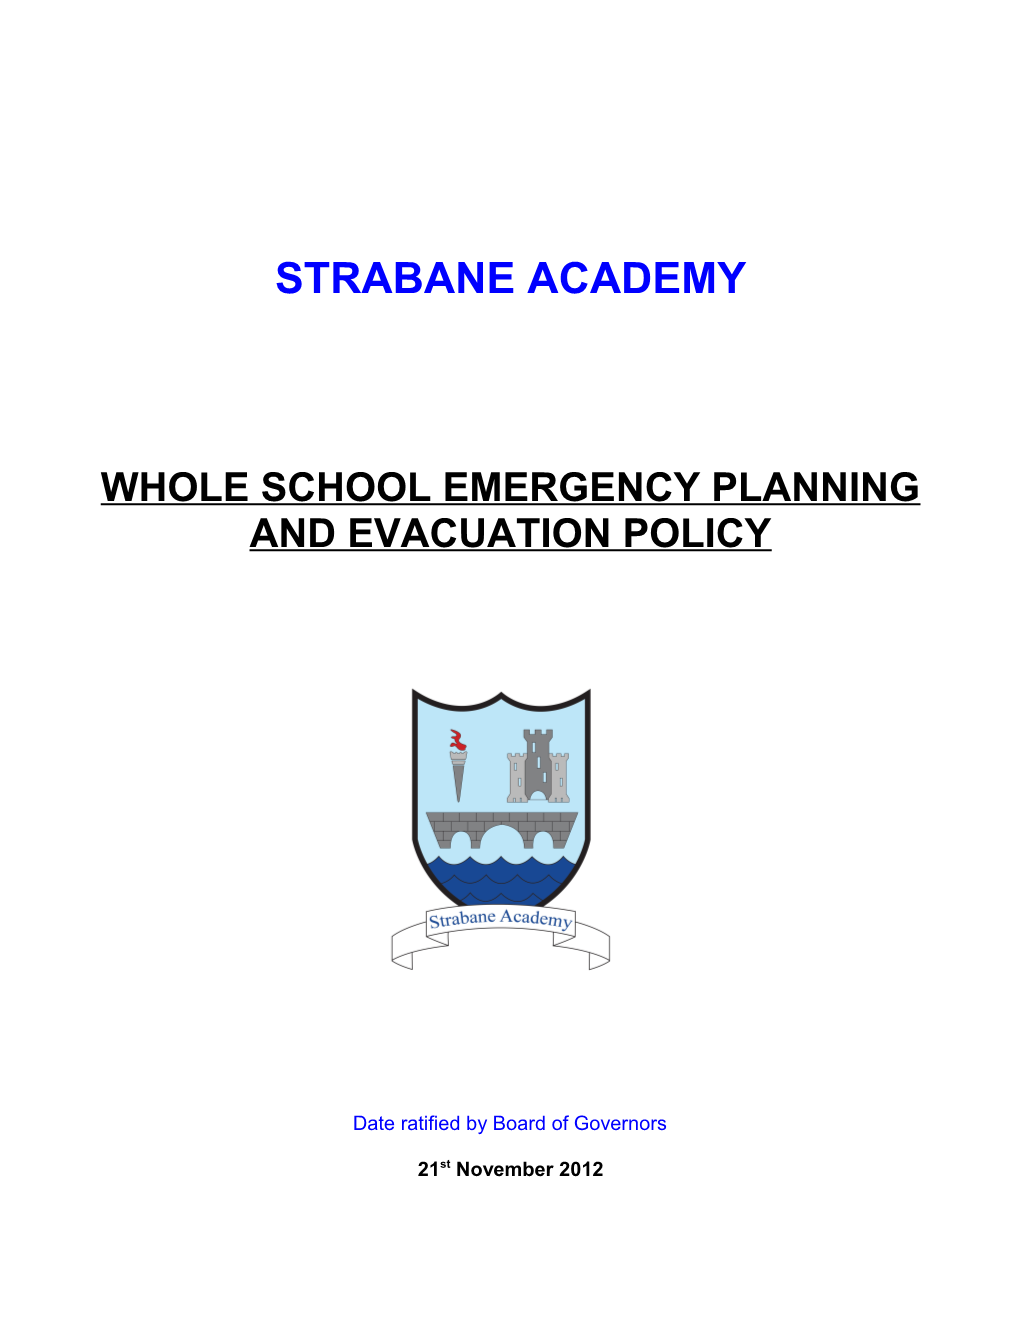 Wholeschool Emergency Planning and Evacuation Policy